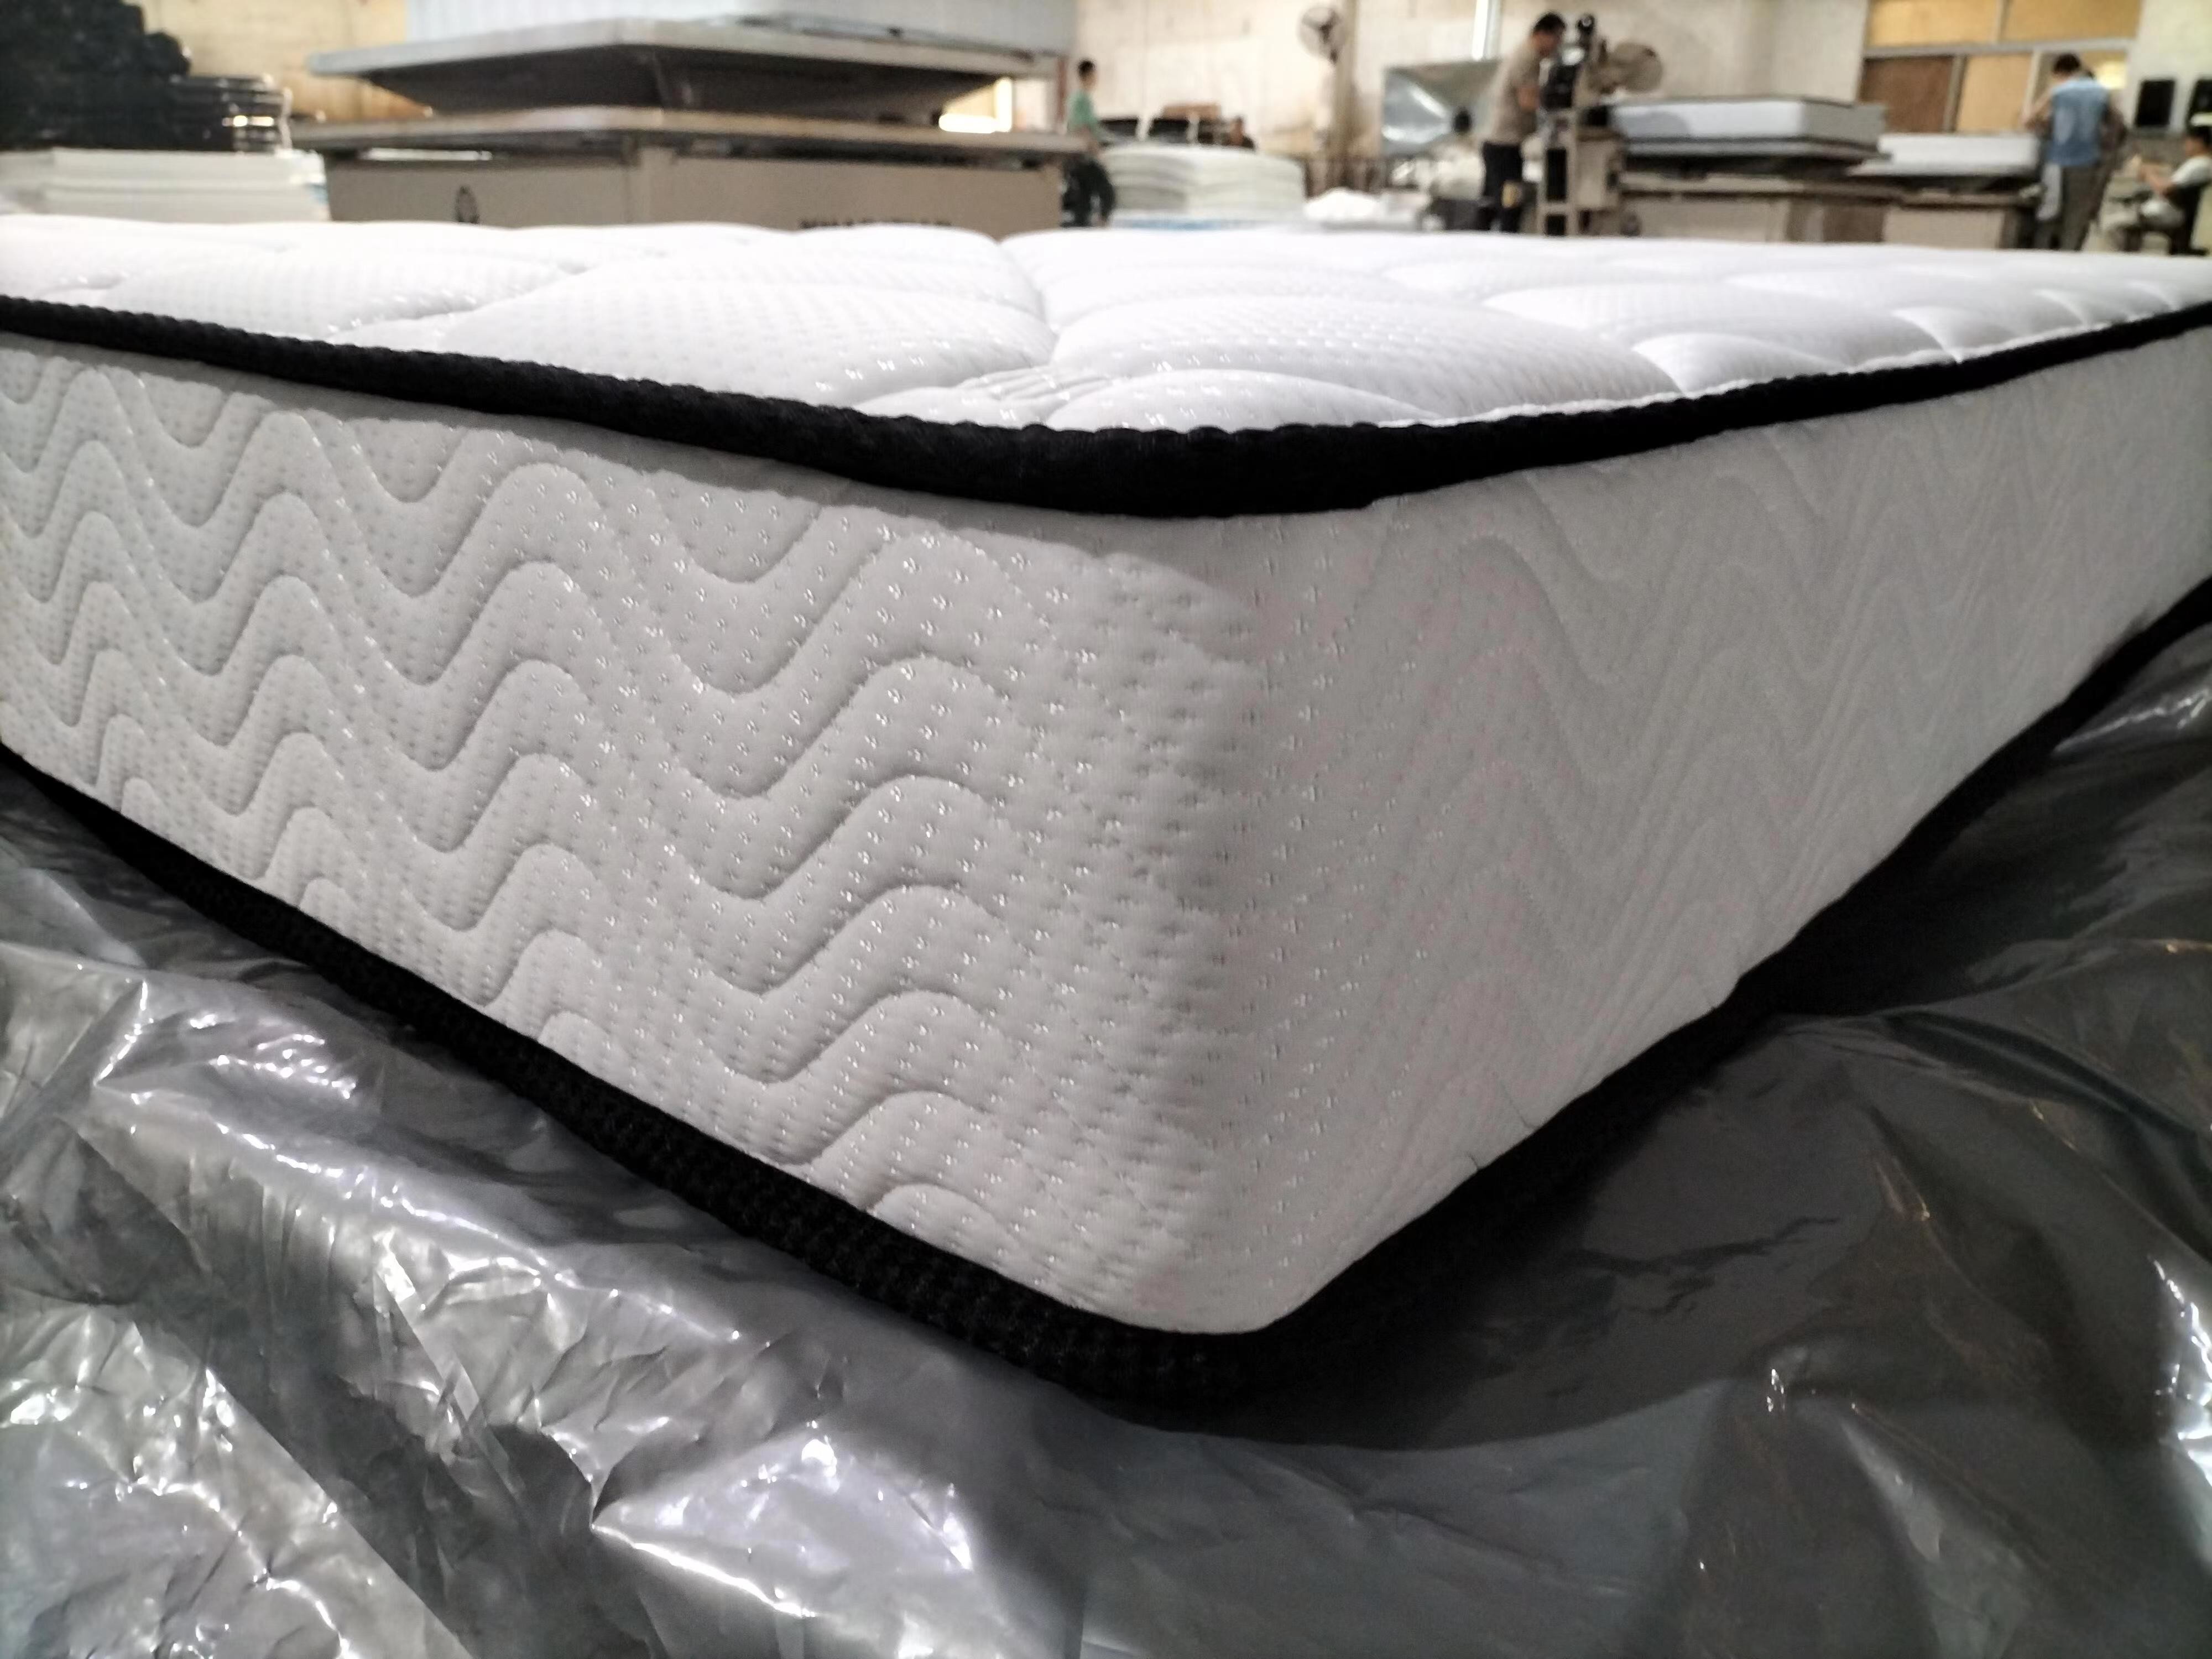 Knitted fabric pocket spring coil mattress with memory foam roll up in a box